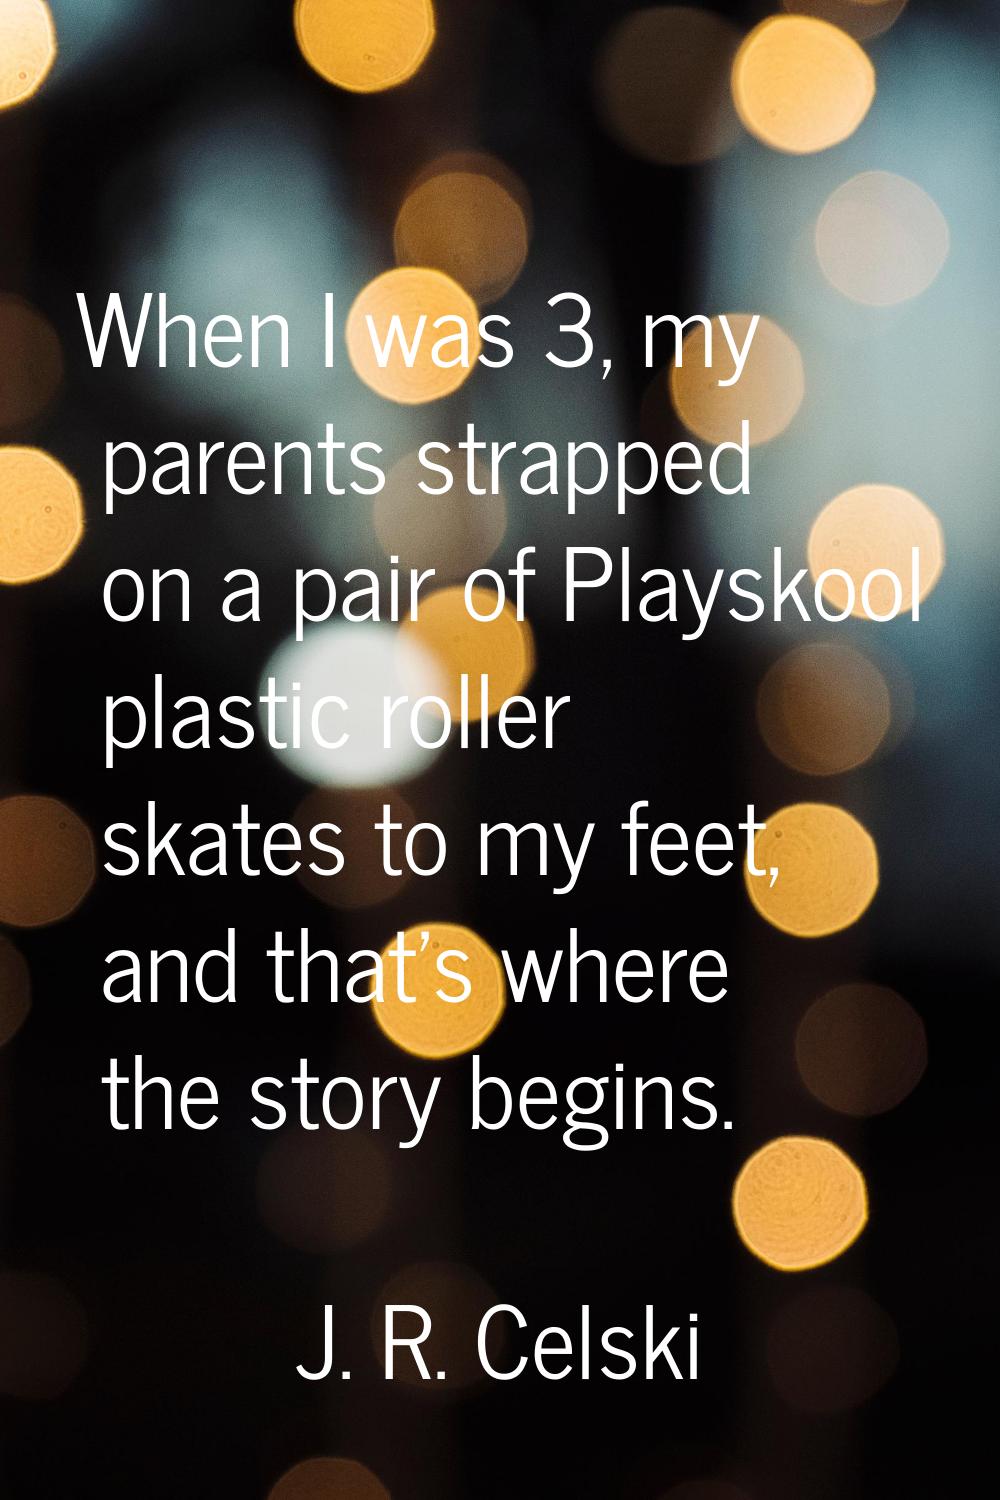 When I was 3, my parents strapped on a pair of Playskool plastic roller skates to my feet, and that